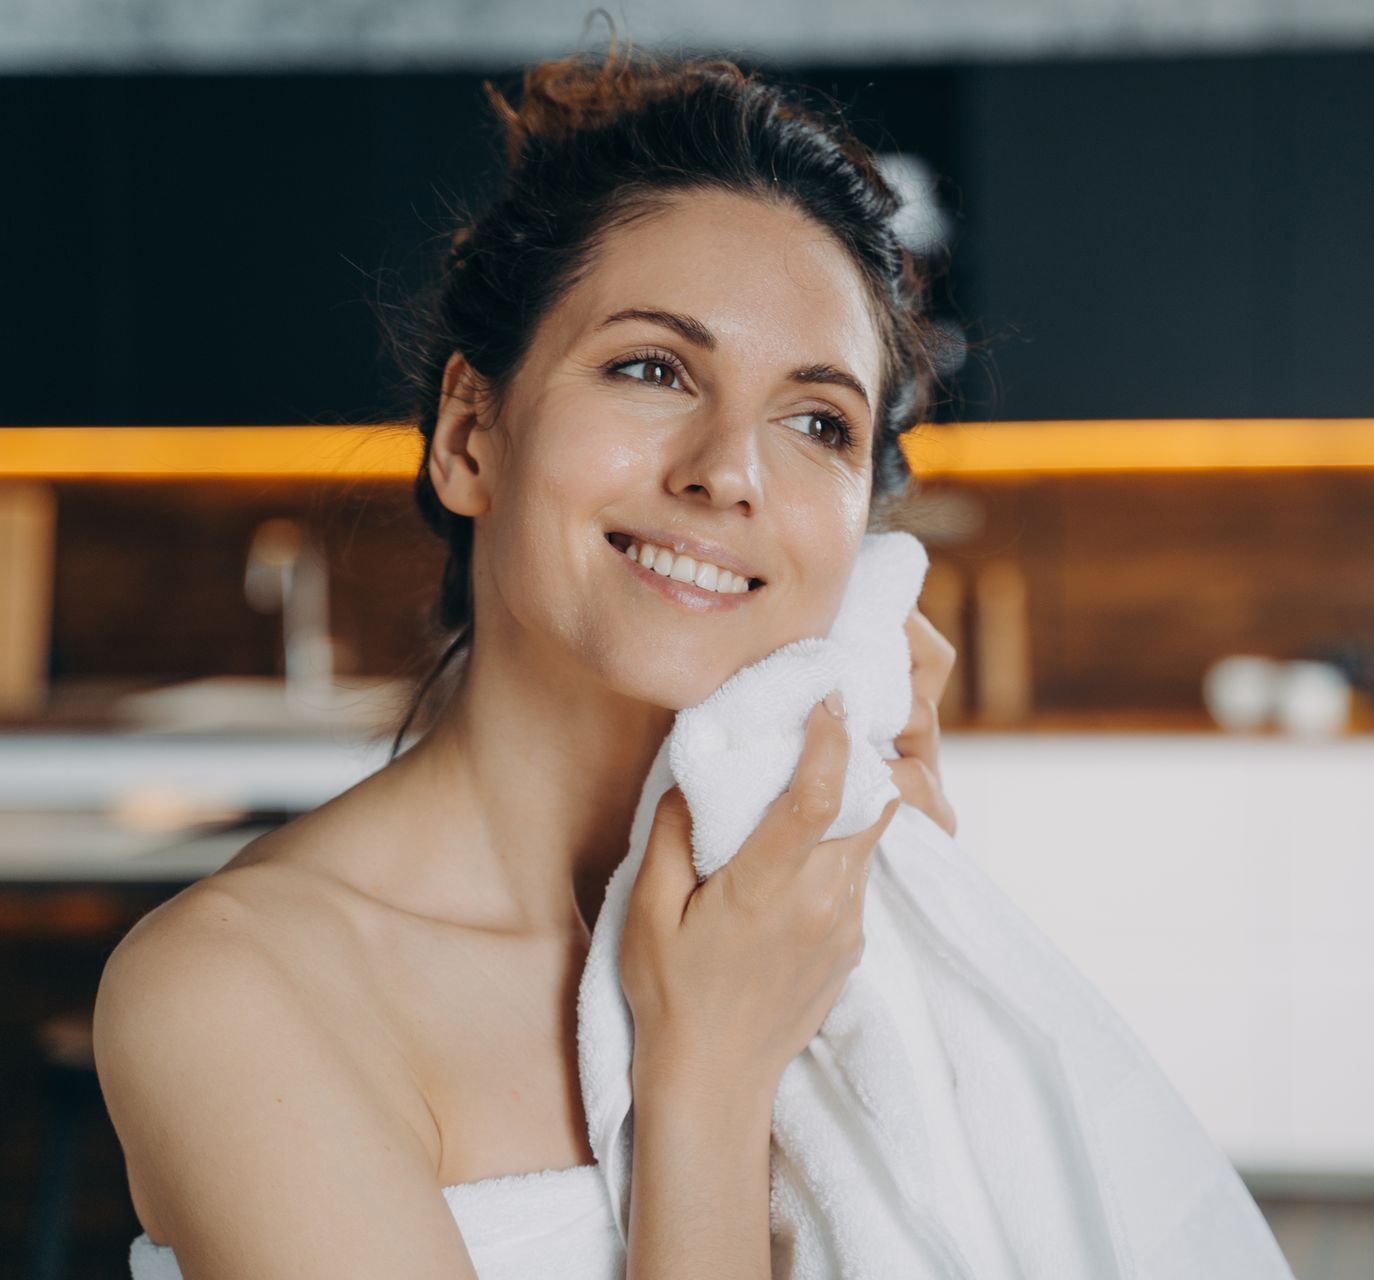 a woman wipes her face with a white towel